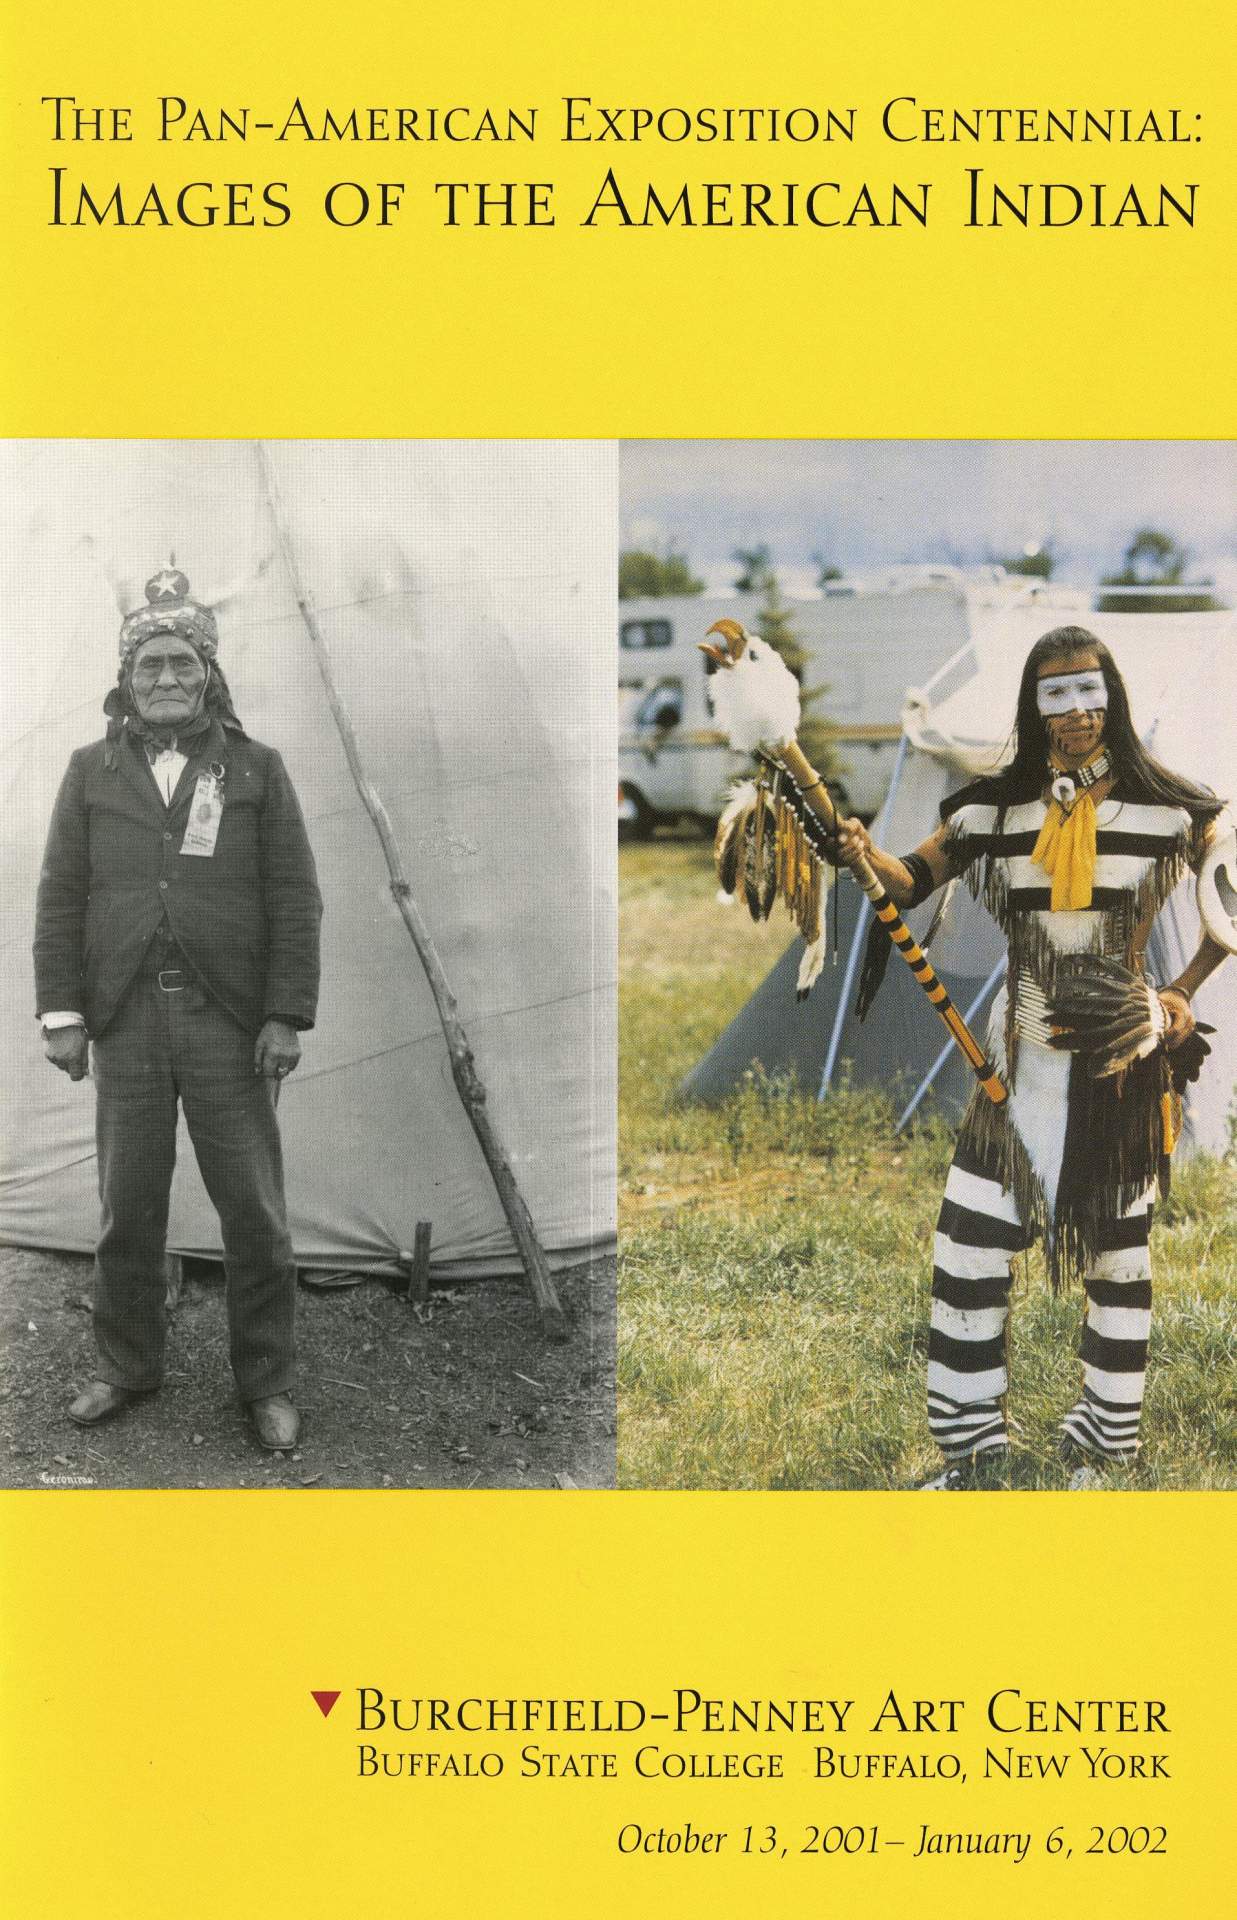 The Pan-American Exposition Centennial: Images of the American Indian